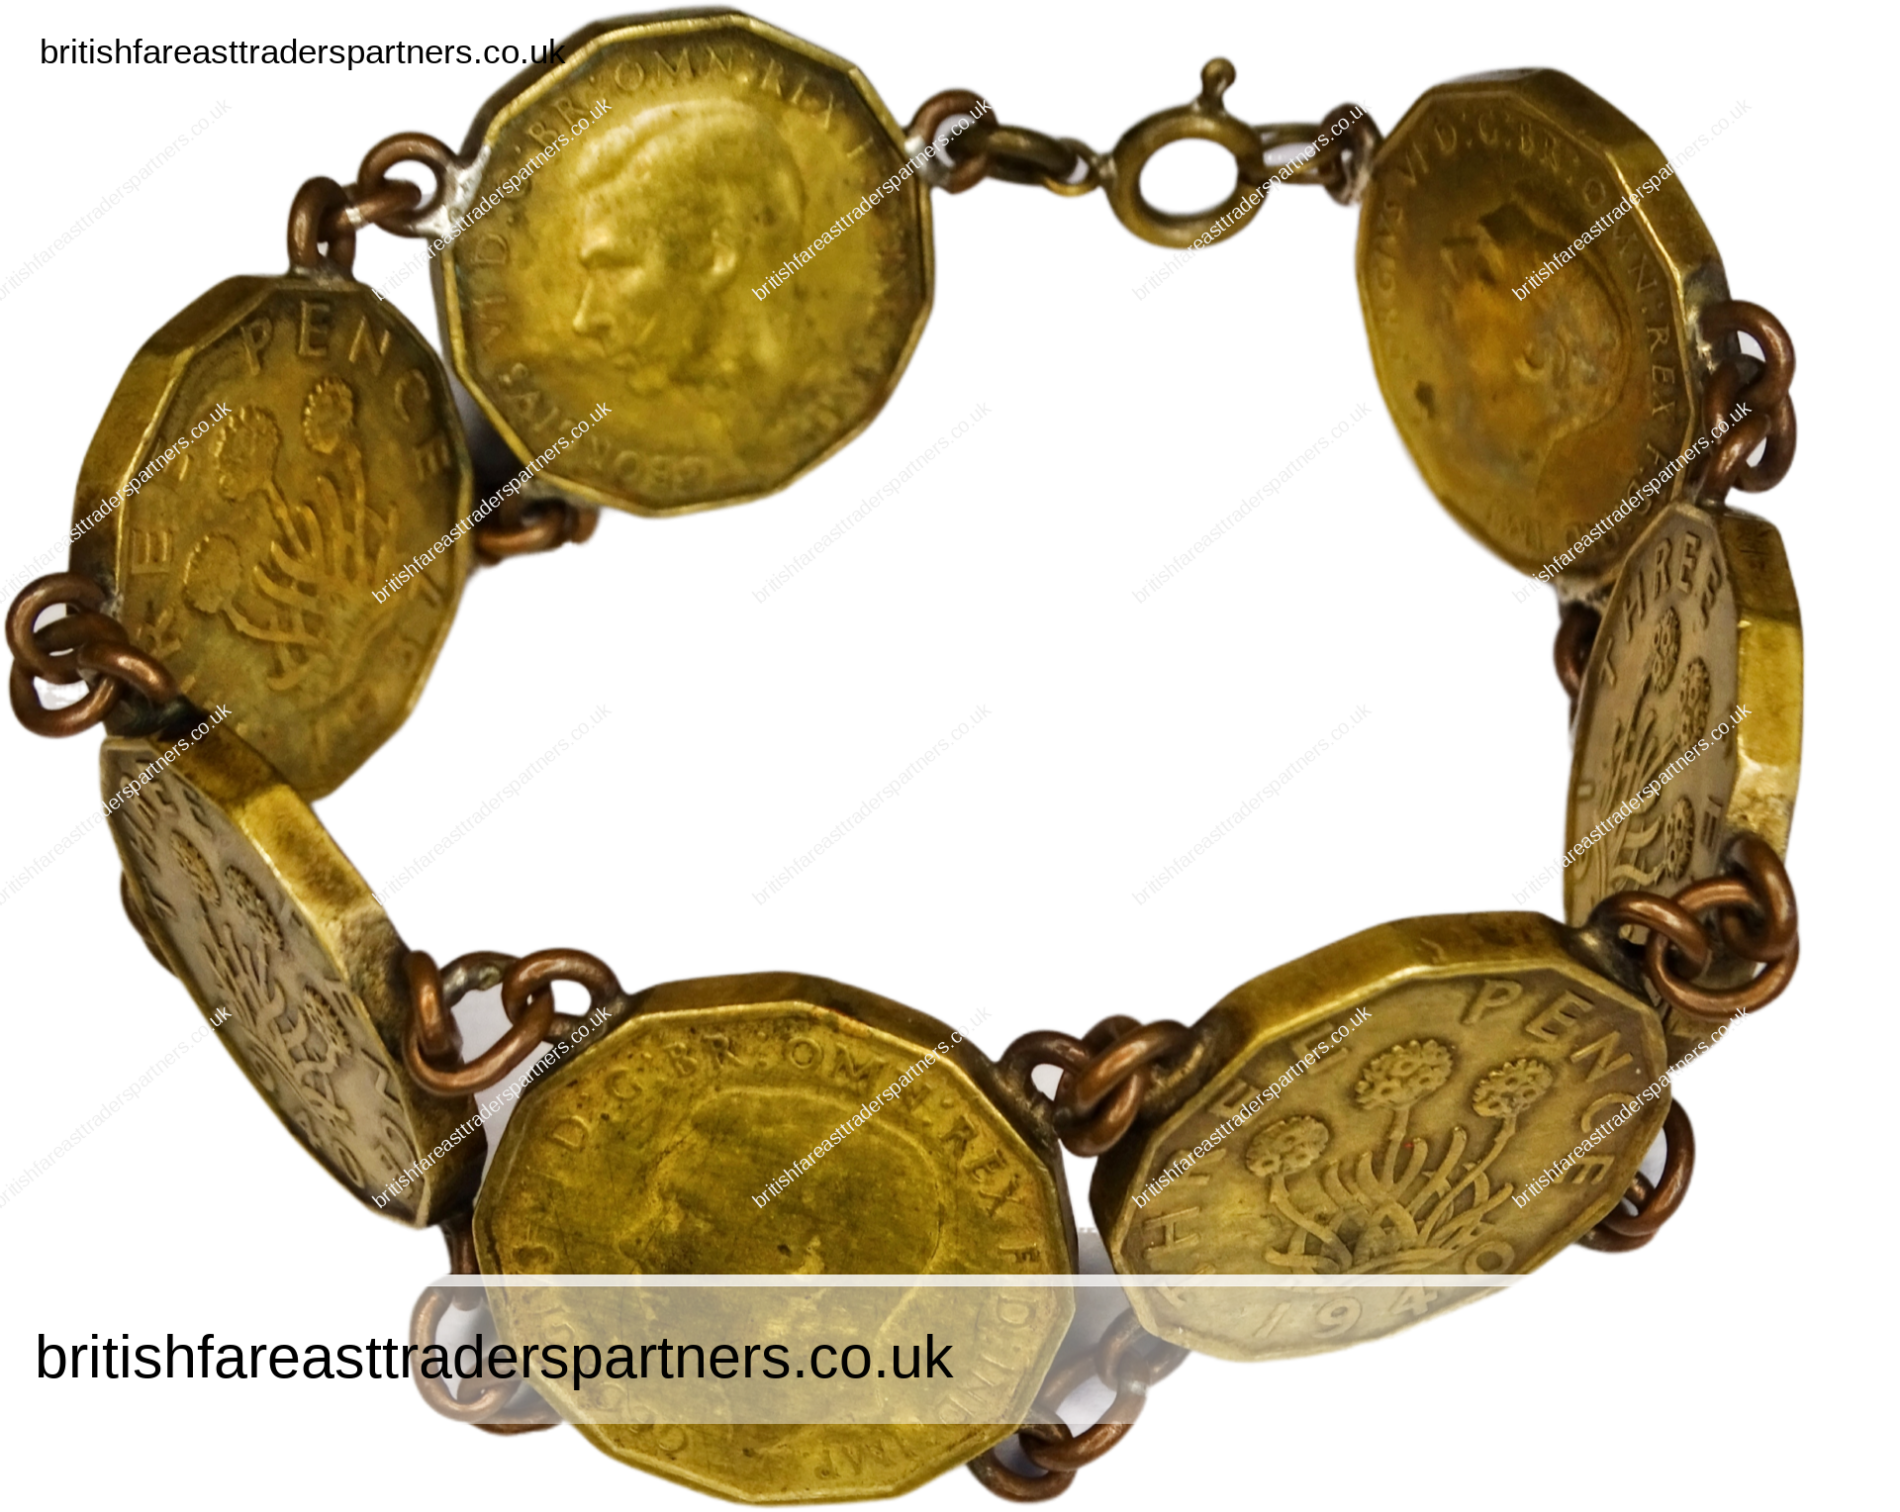 VINTAGE 1937 1940 Three Pence COINS King George VI CHARM BRACELET HERITAGE | HISTORY  COSTUME JEWELLERY COLLECTABLES